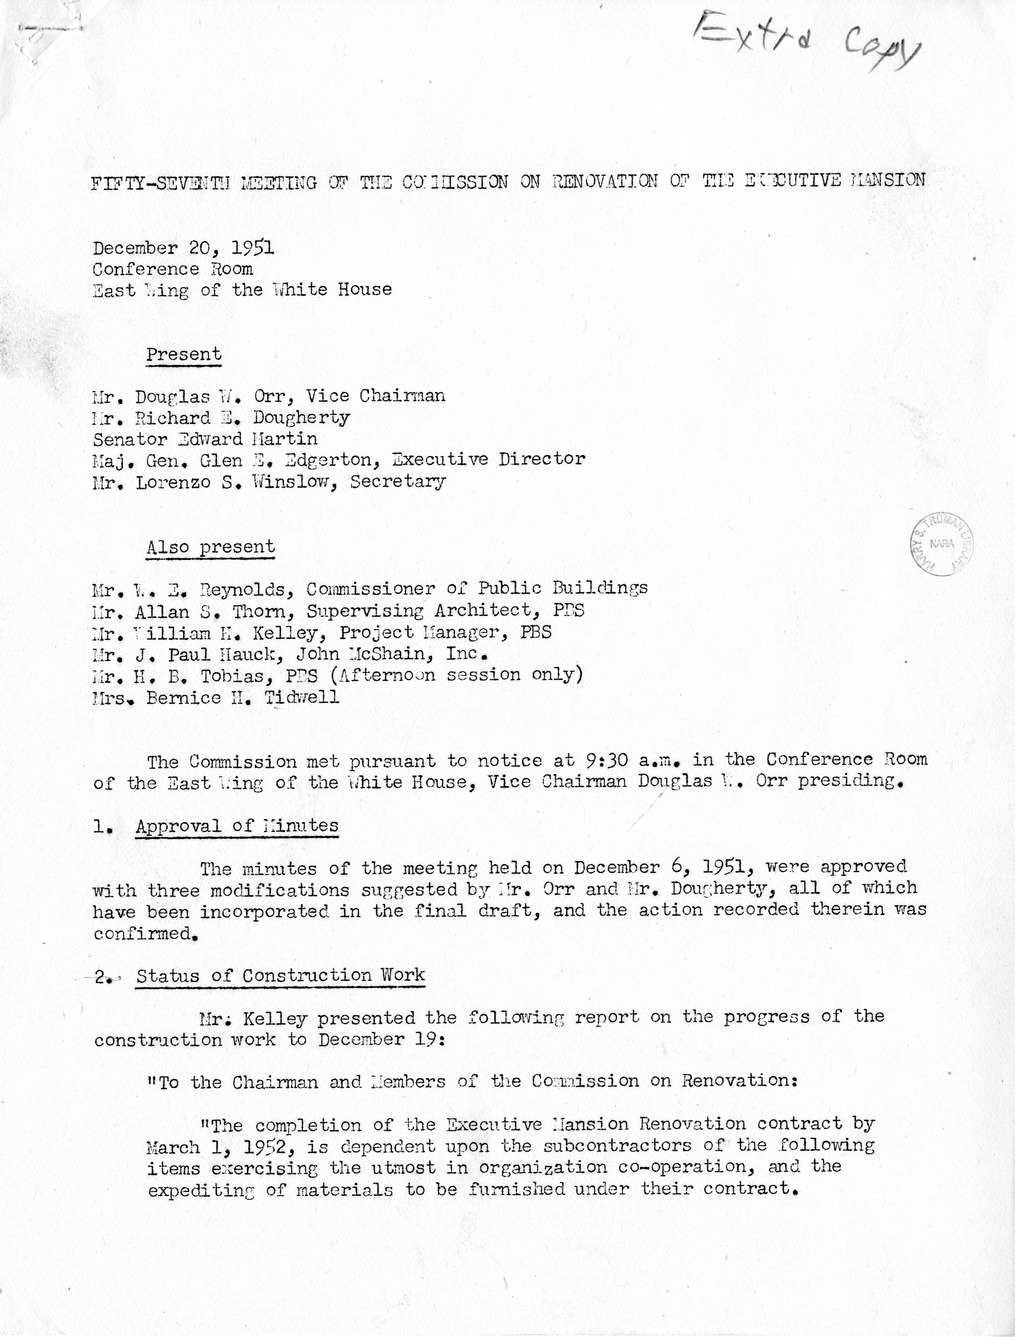 Minutes of the Fifty-Seventh Meeting of the Commission on Renovation of the Executive Mansion